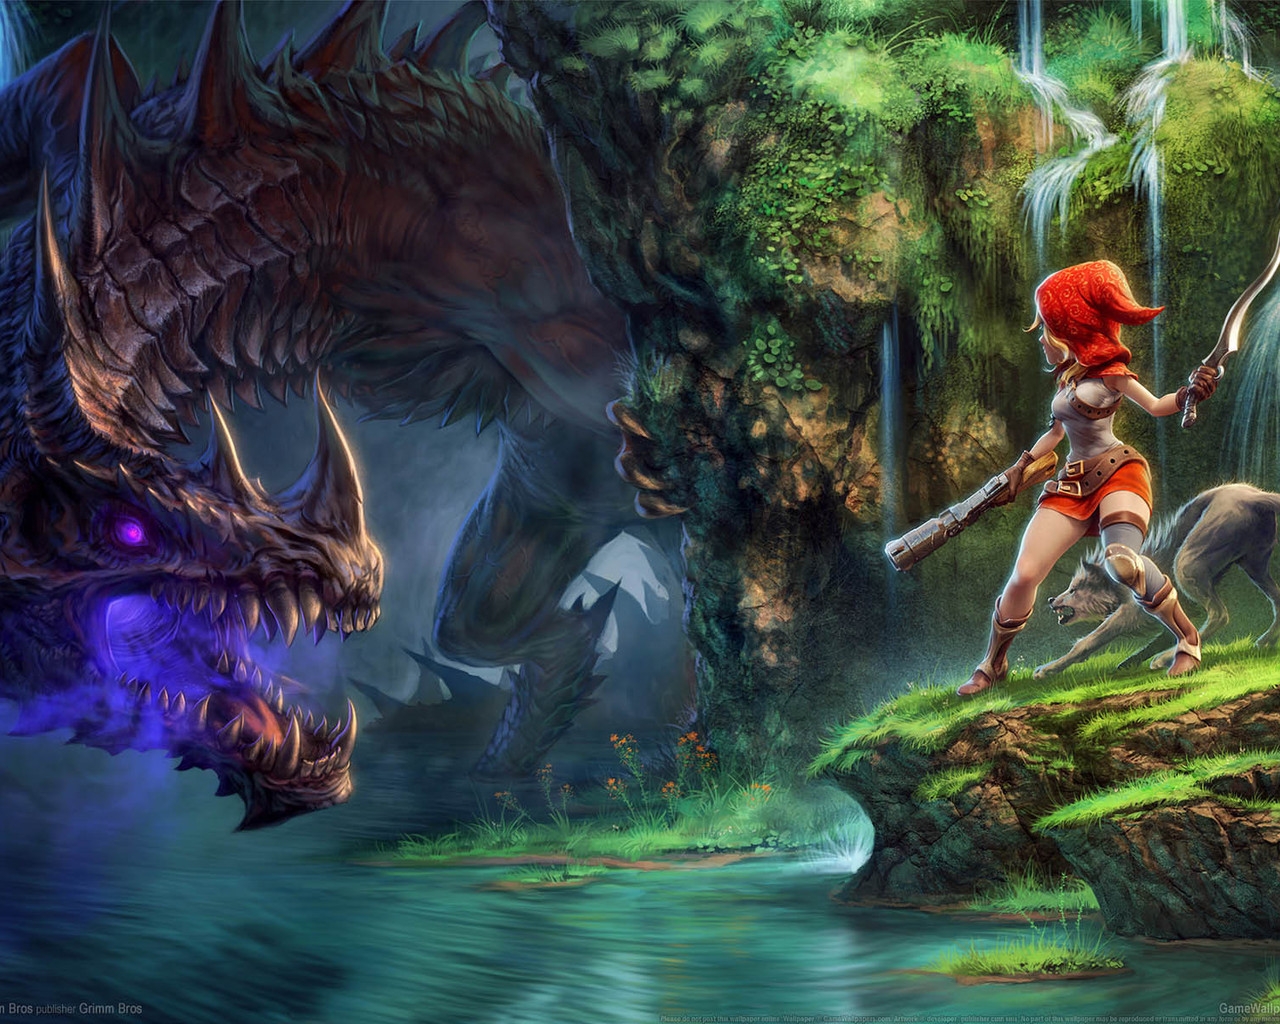 Dragon Fin Soup Game for 1280 x 1024 resolution